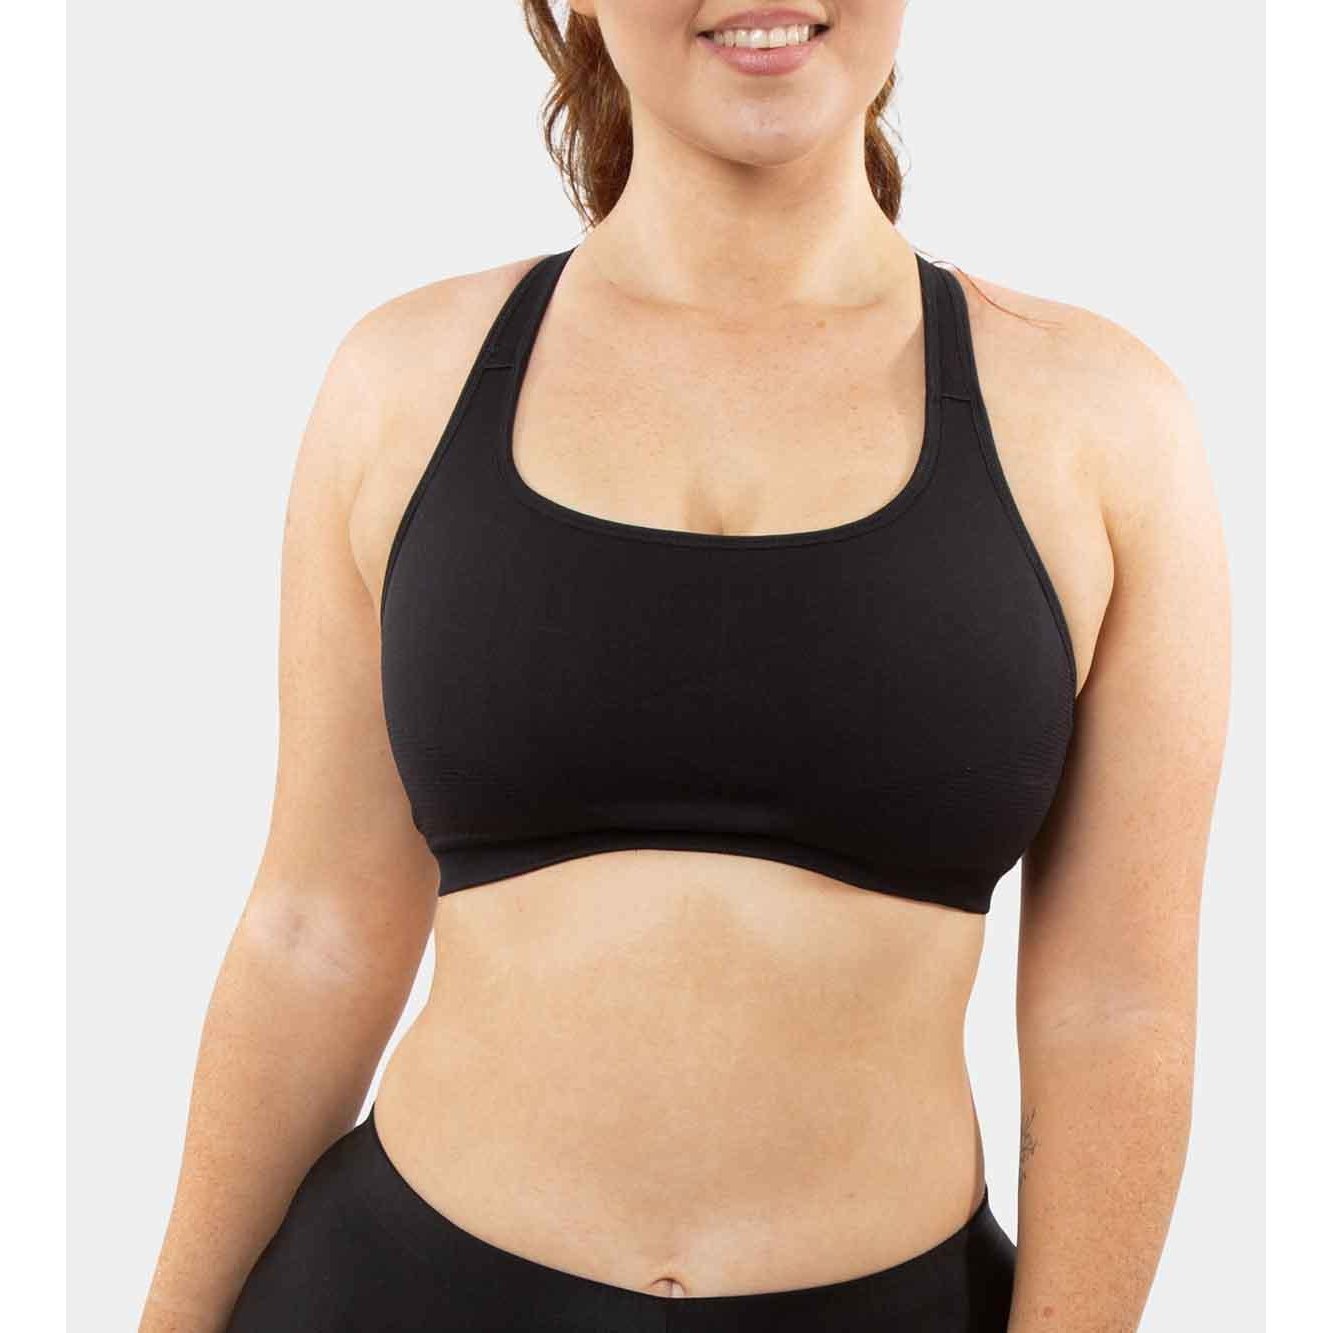 Triumph Sports Bra Triaction Seamfree Crop Top from Illusions Lingerie in Melbourne